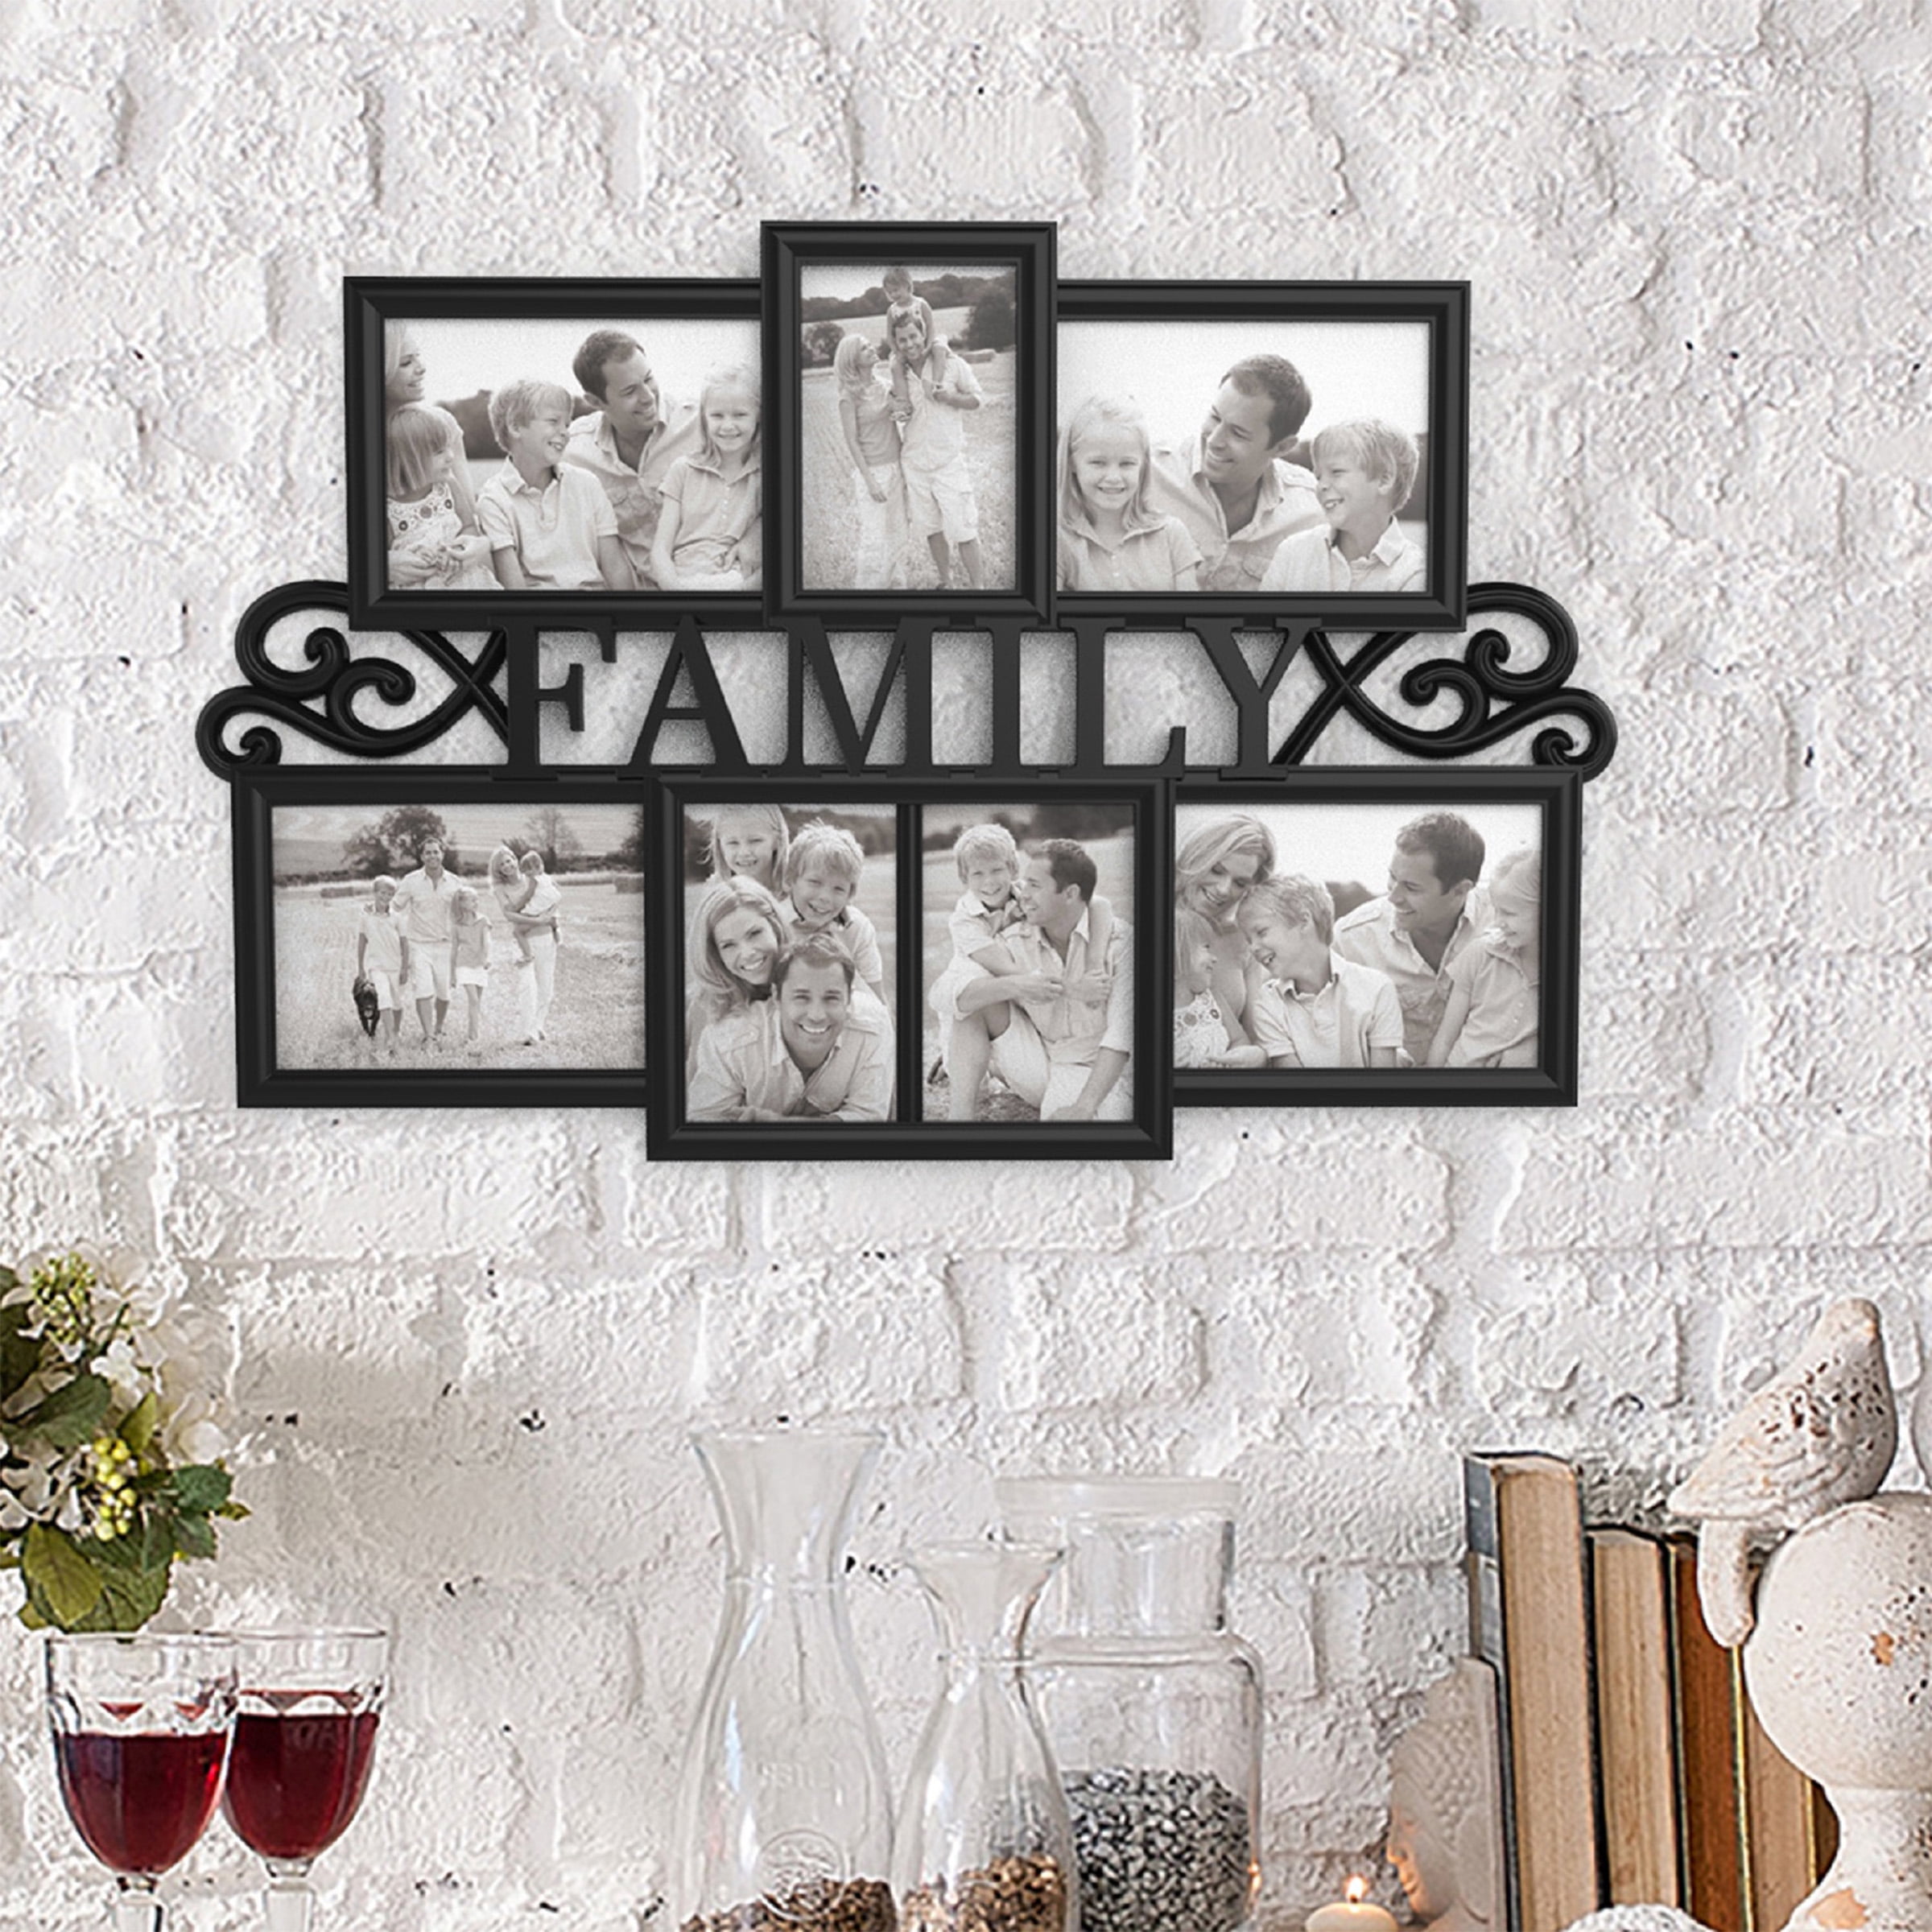 CrazyDeal Family Tree Wall Decal Picture Frame Collage 3D DIY Stickers Decorations Art for Living Room Home Decor Gallery Large 